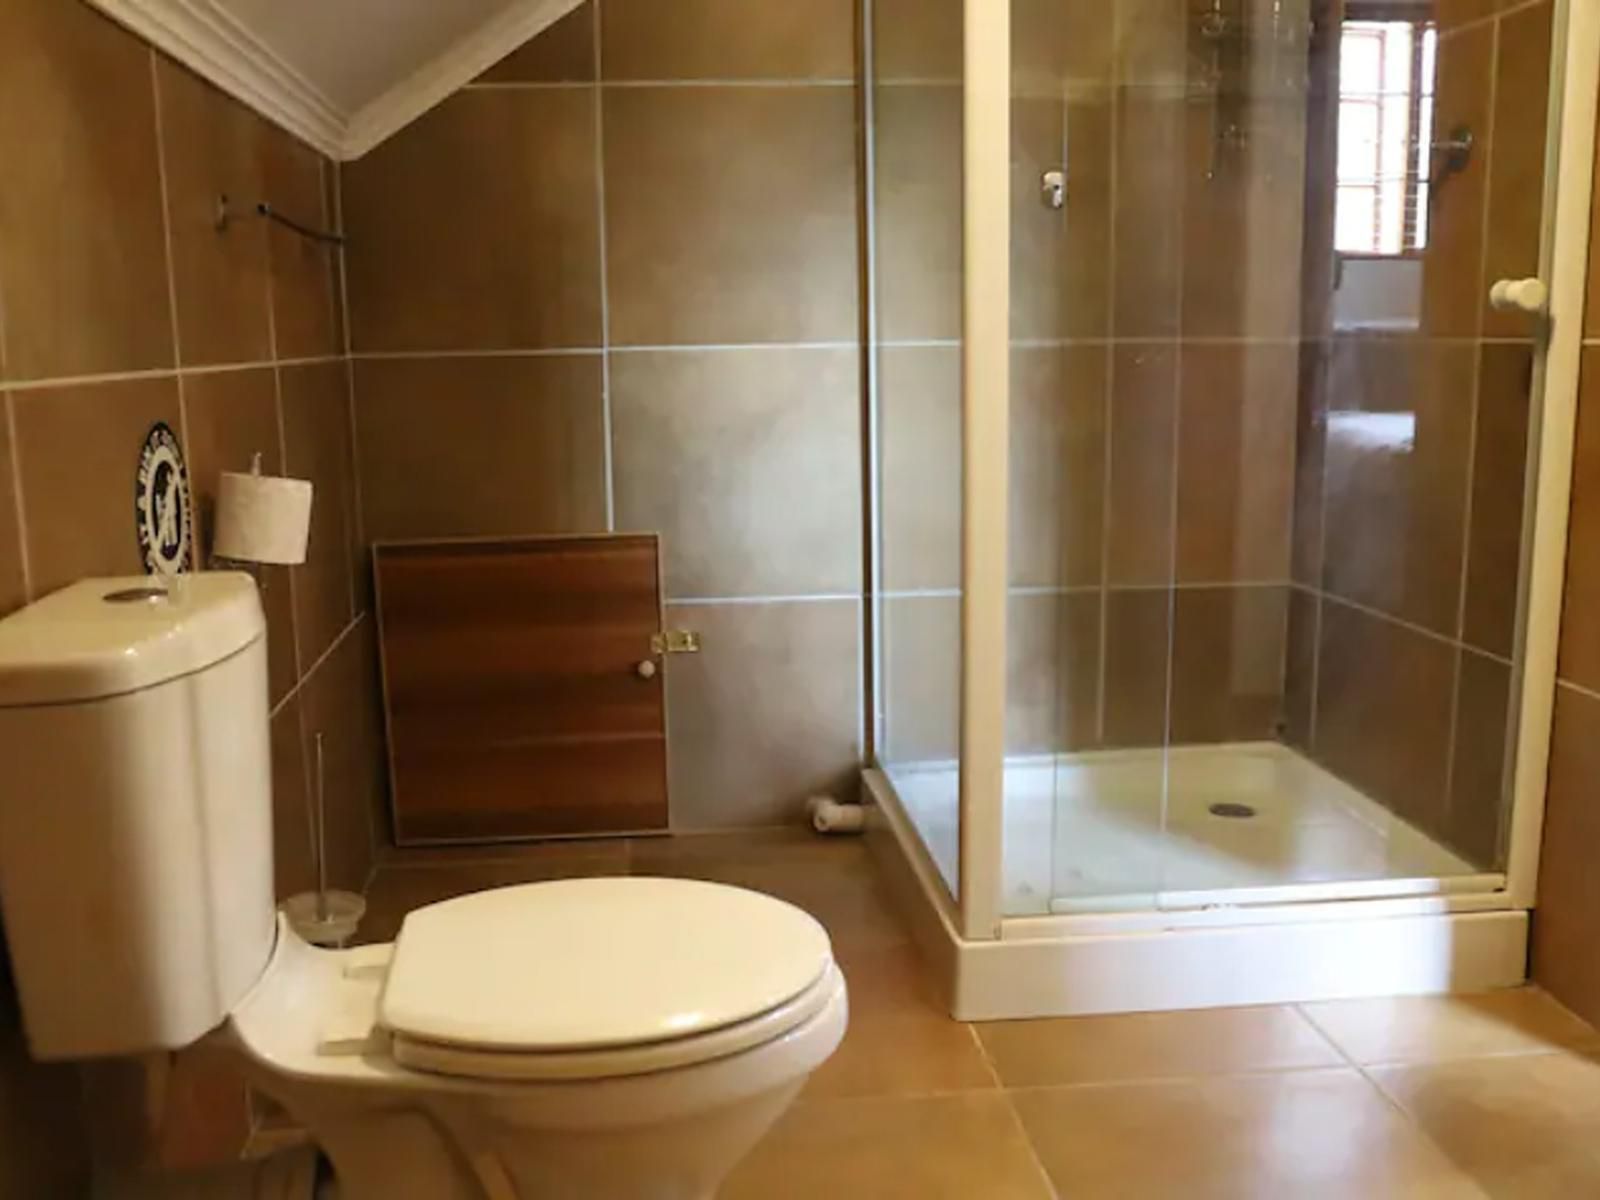 The Oak Potch Guesthouse Die Bult Potchefstroom North West Province South Africa Bathroom